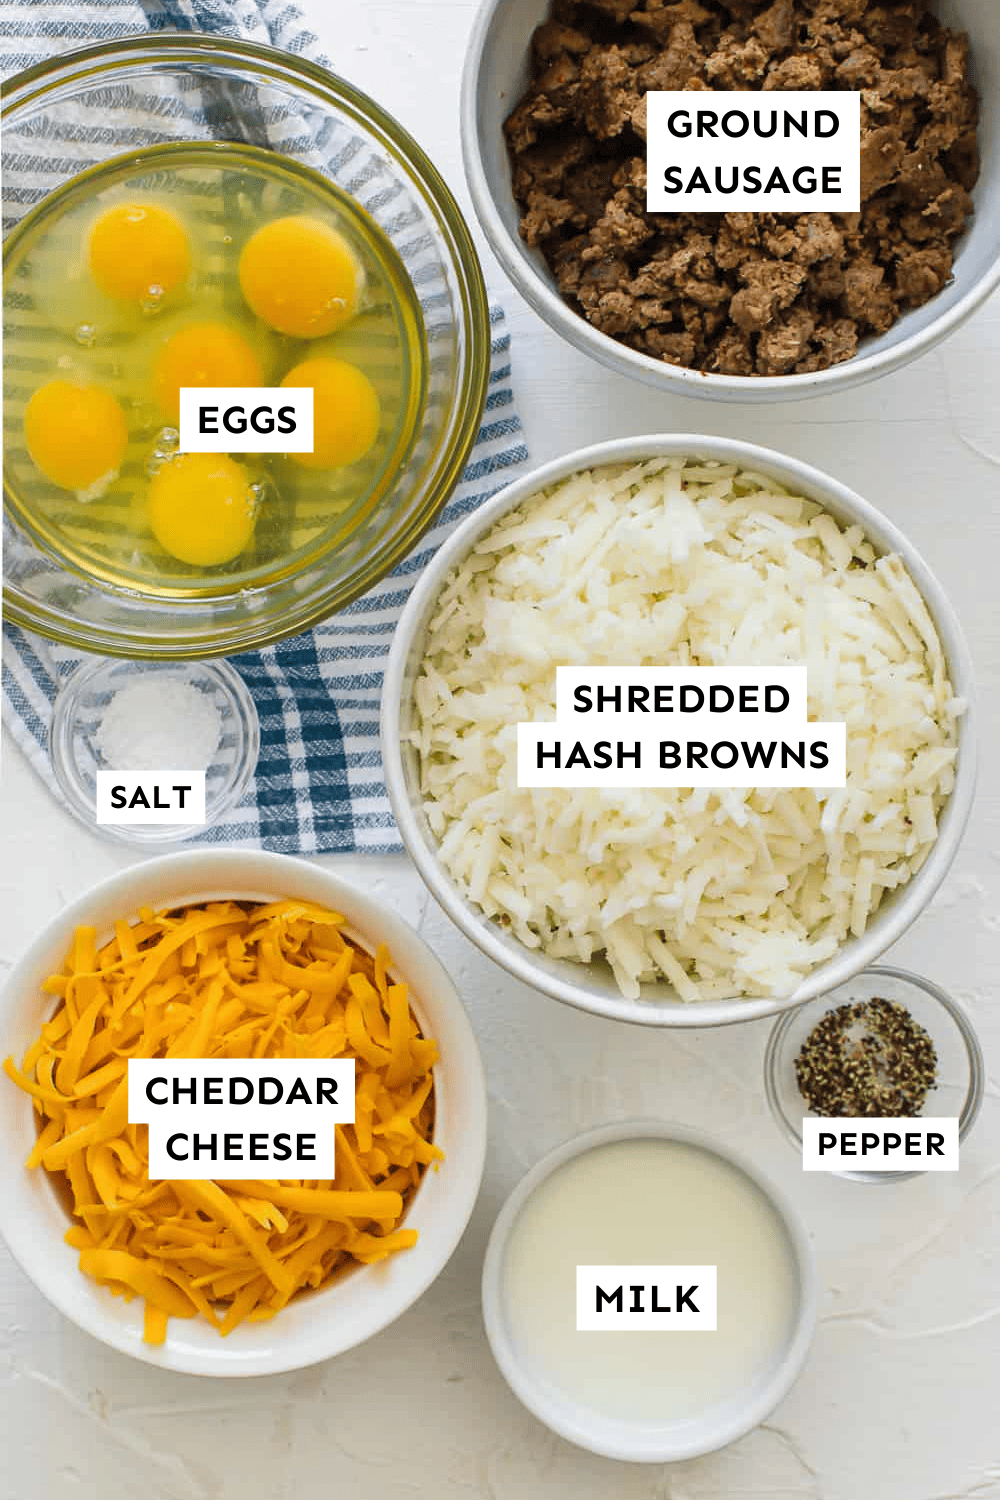 Ingredients in bowls for a make ahead breakfast casserole, including hash browns, sausage, cheese, eggs, milk, and salt and pepper.